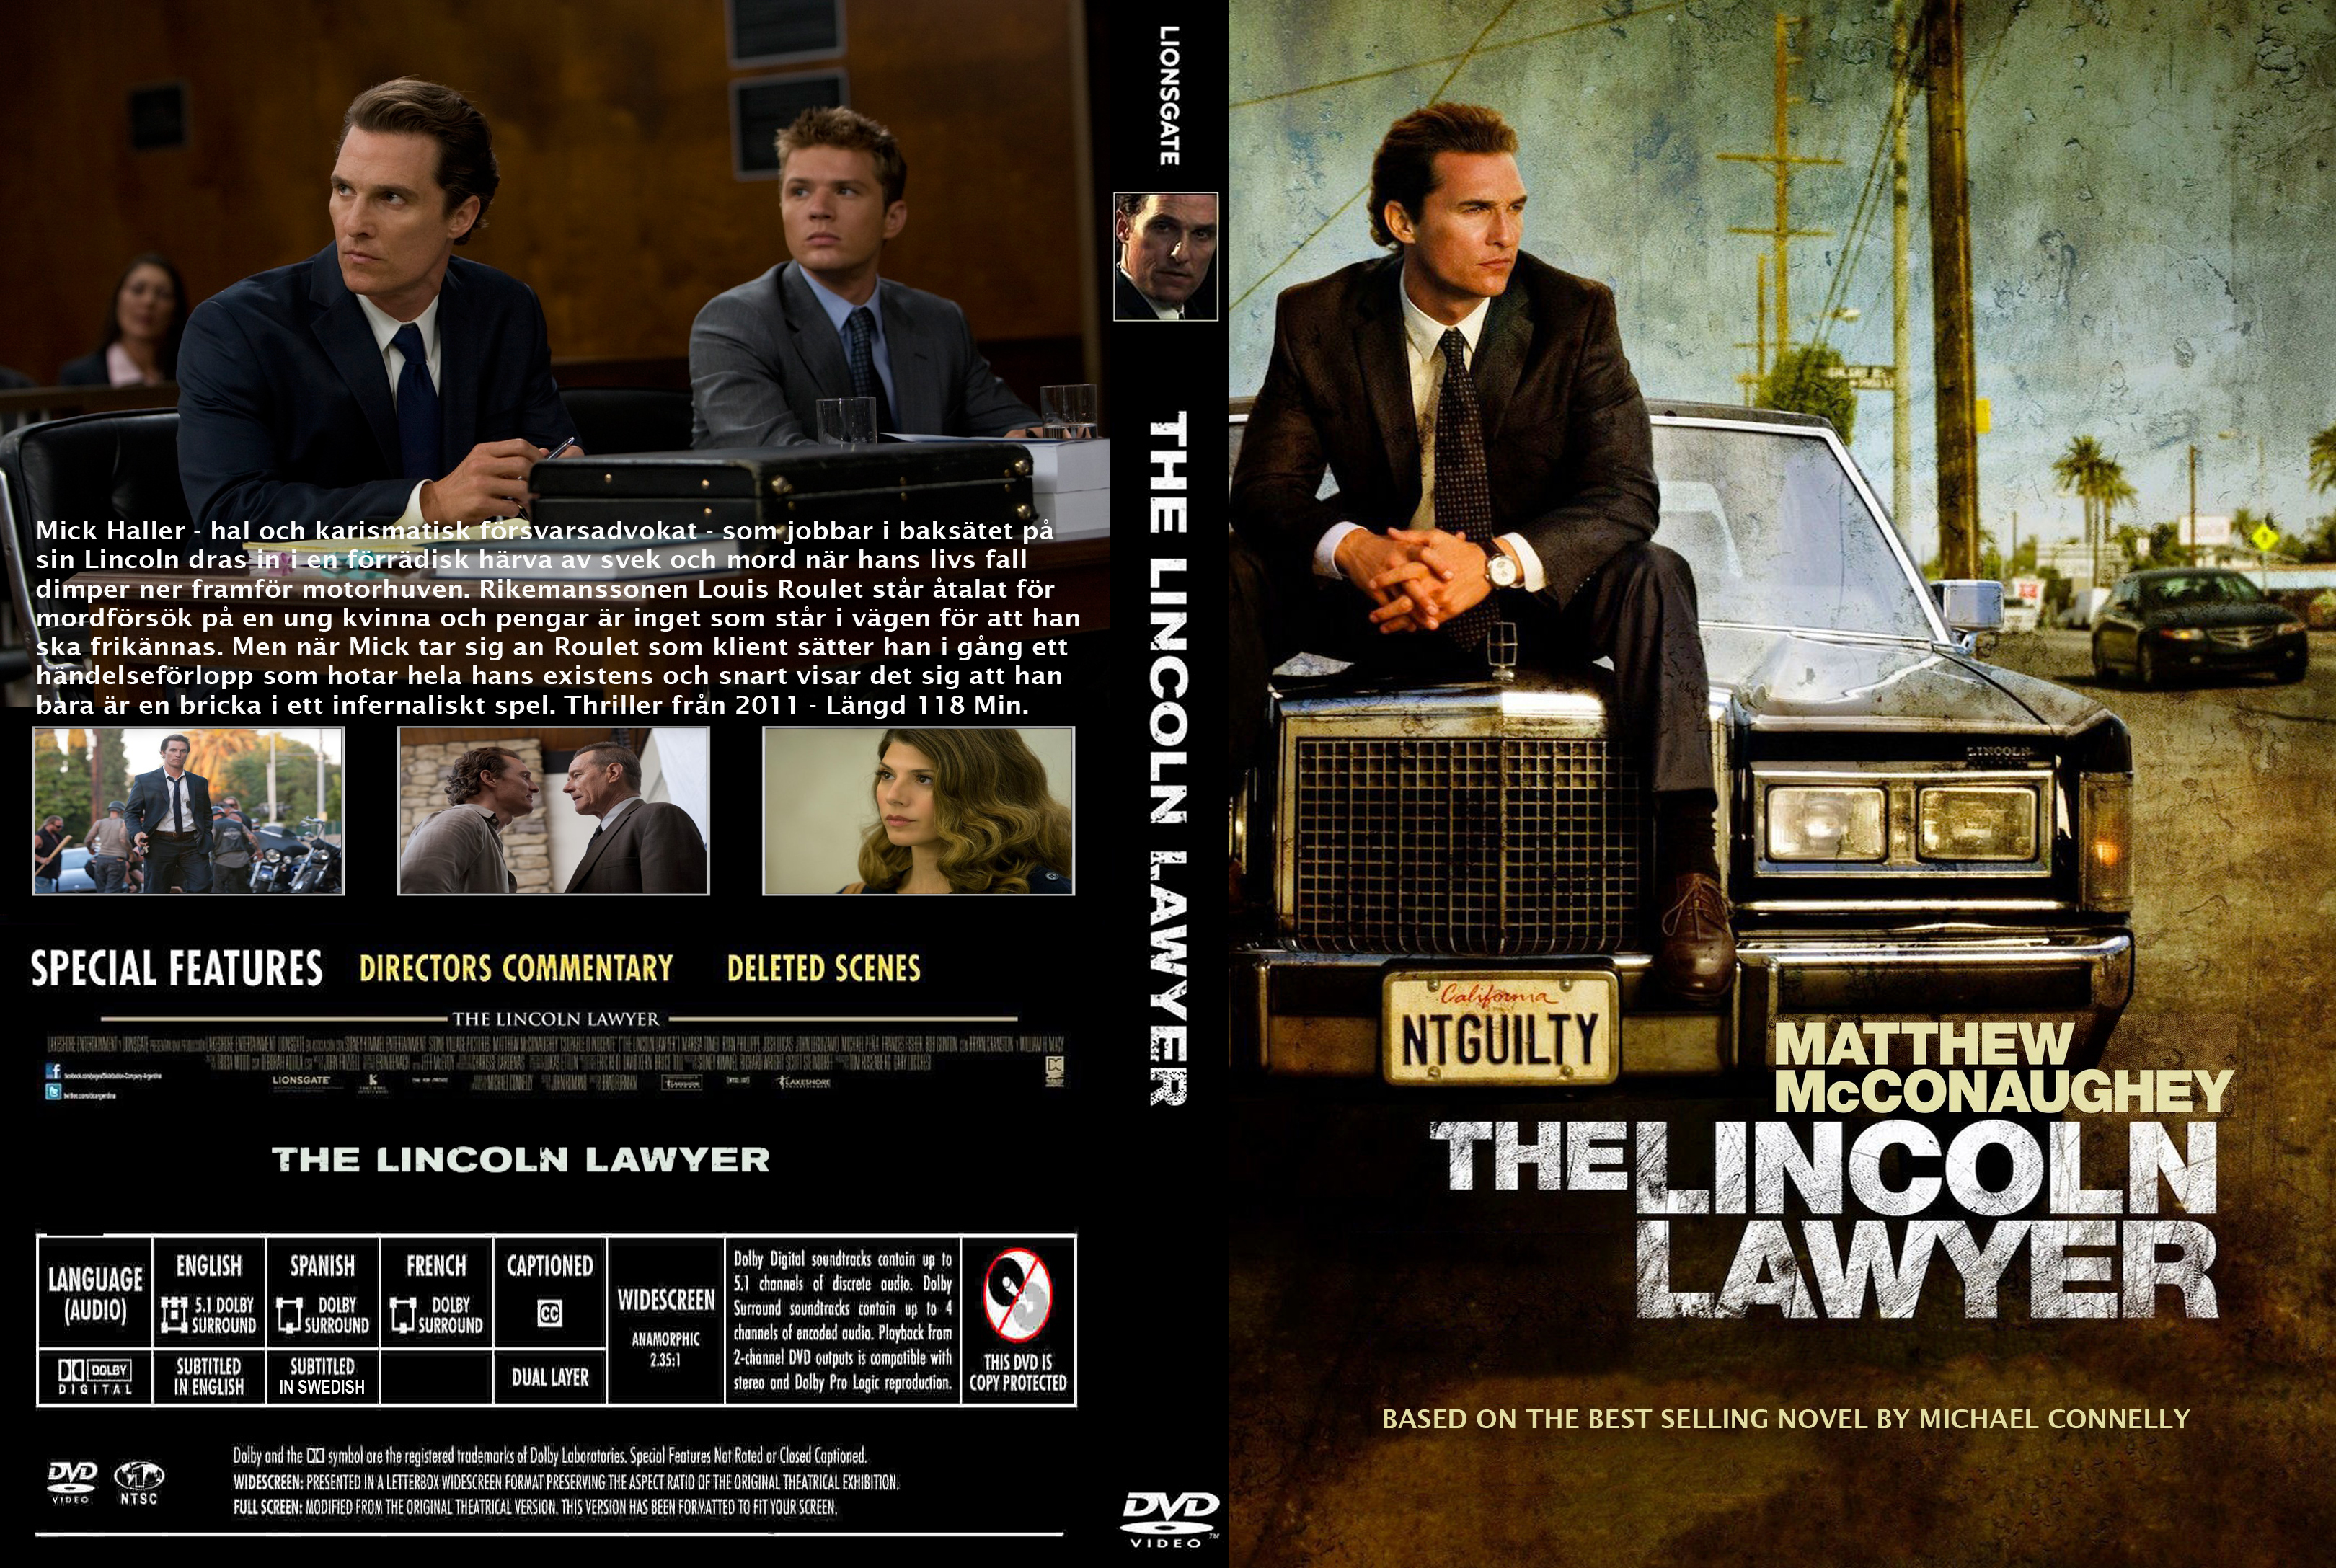 The Lincoln Lawyer #8